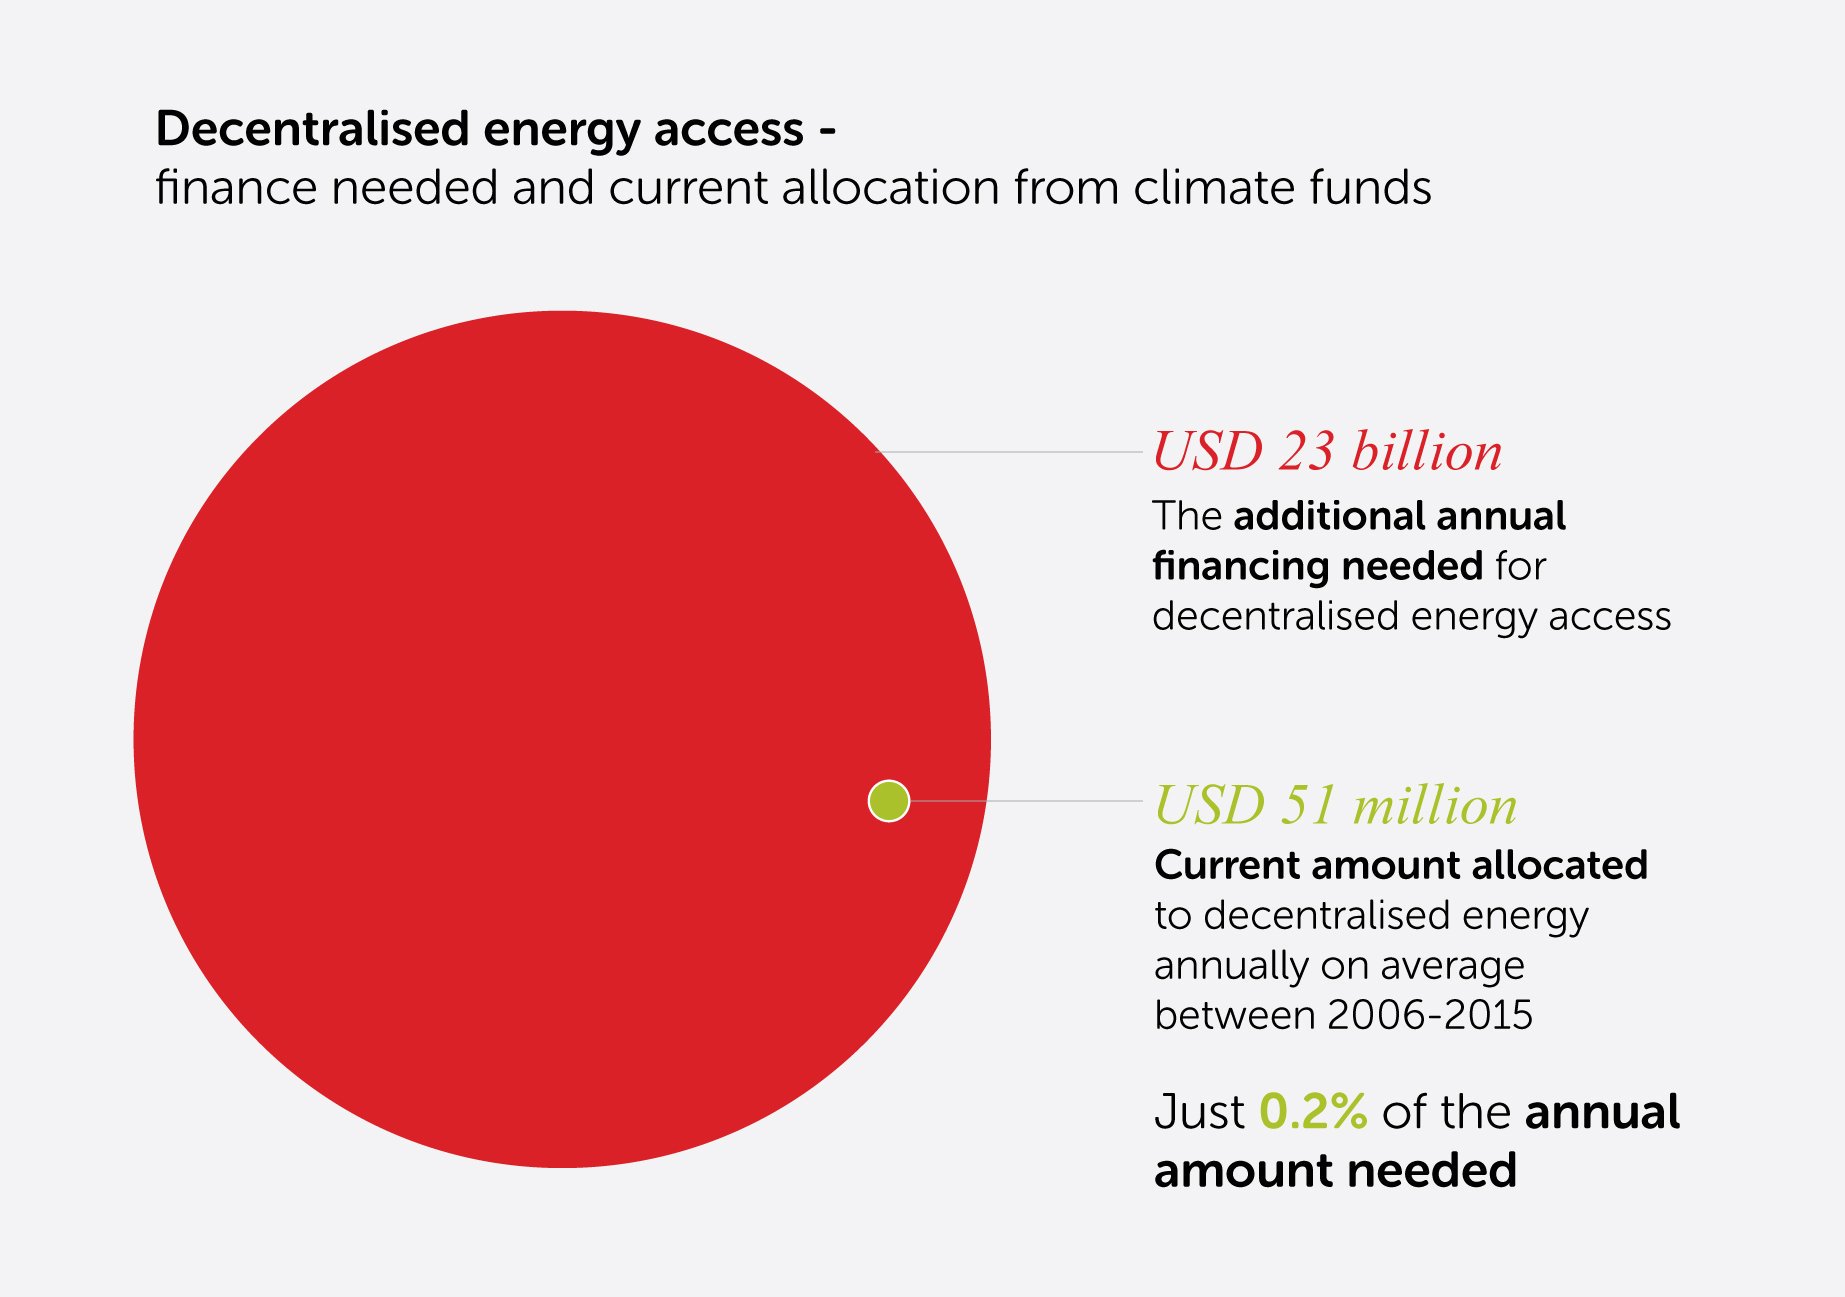 An extra $23bn per year is needed for deentralised #energyaccess - only 0.2% is currently being allocated, says Best #COP22 @hivos https://t.co/79OZFkgK7V